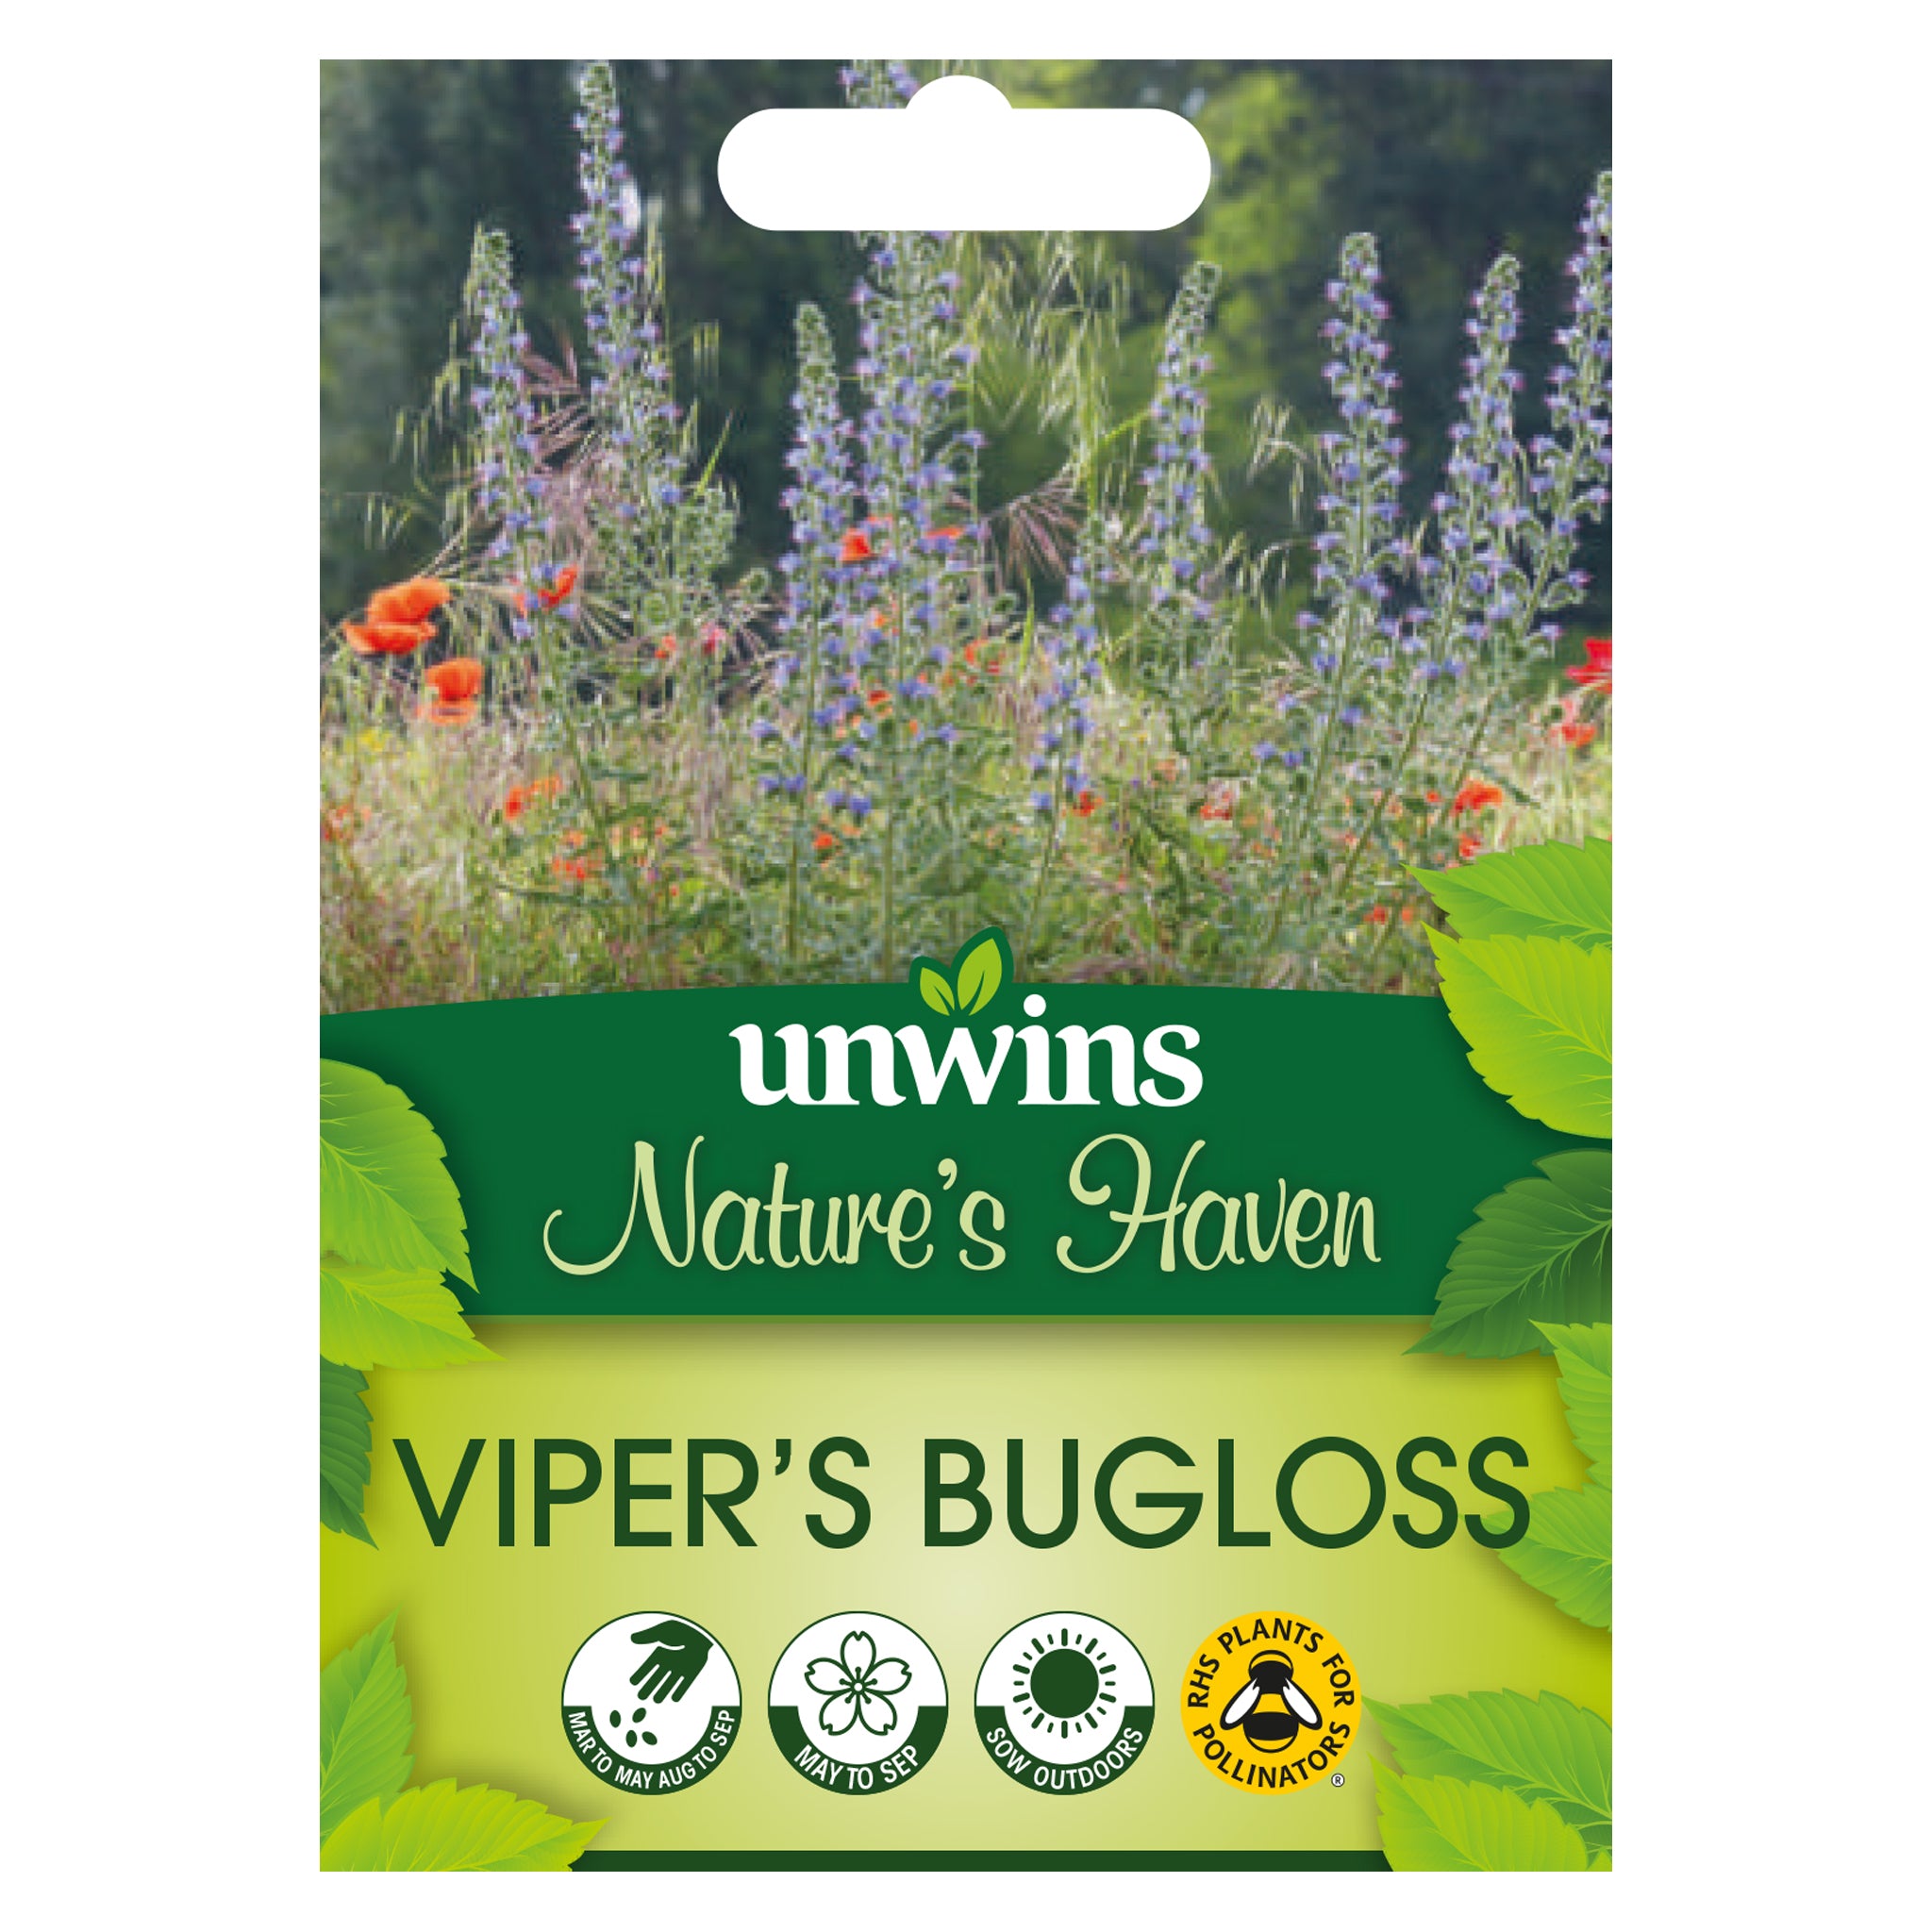 Nature's Haven Viper's Bugloss Seeds